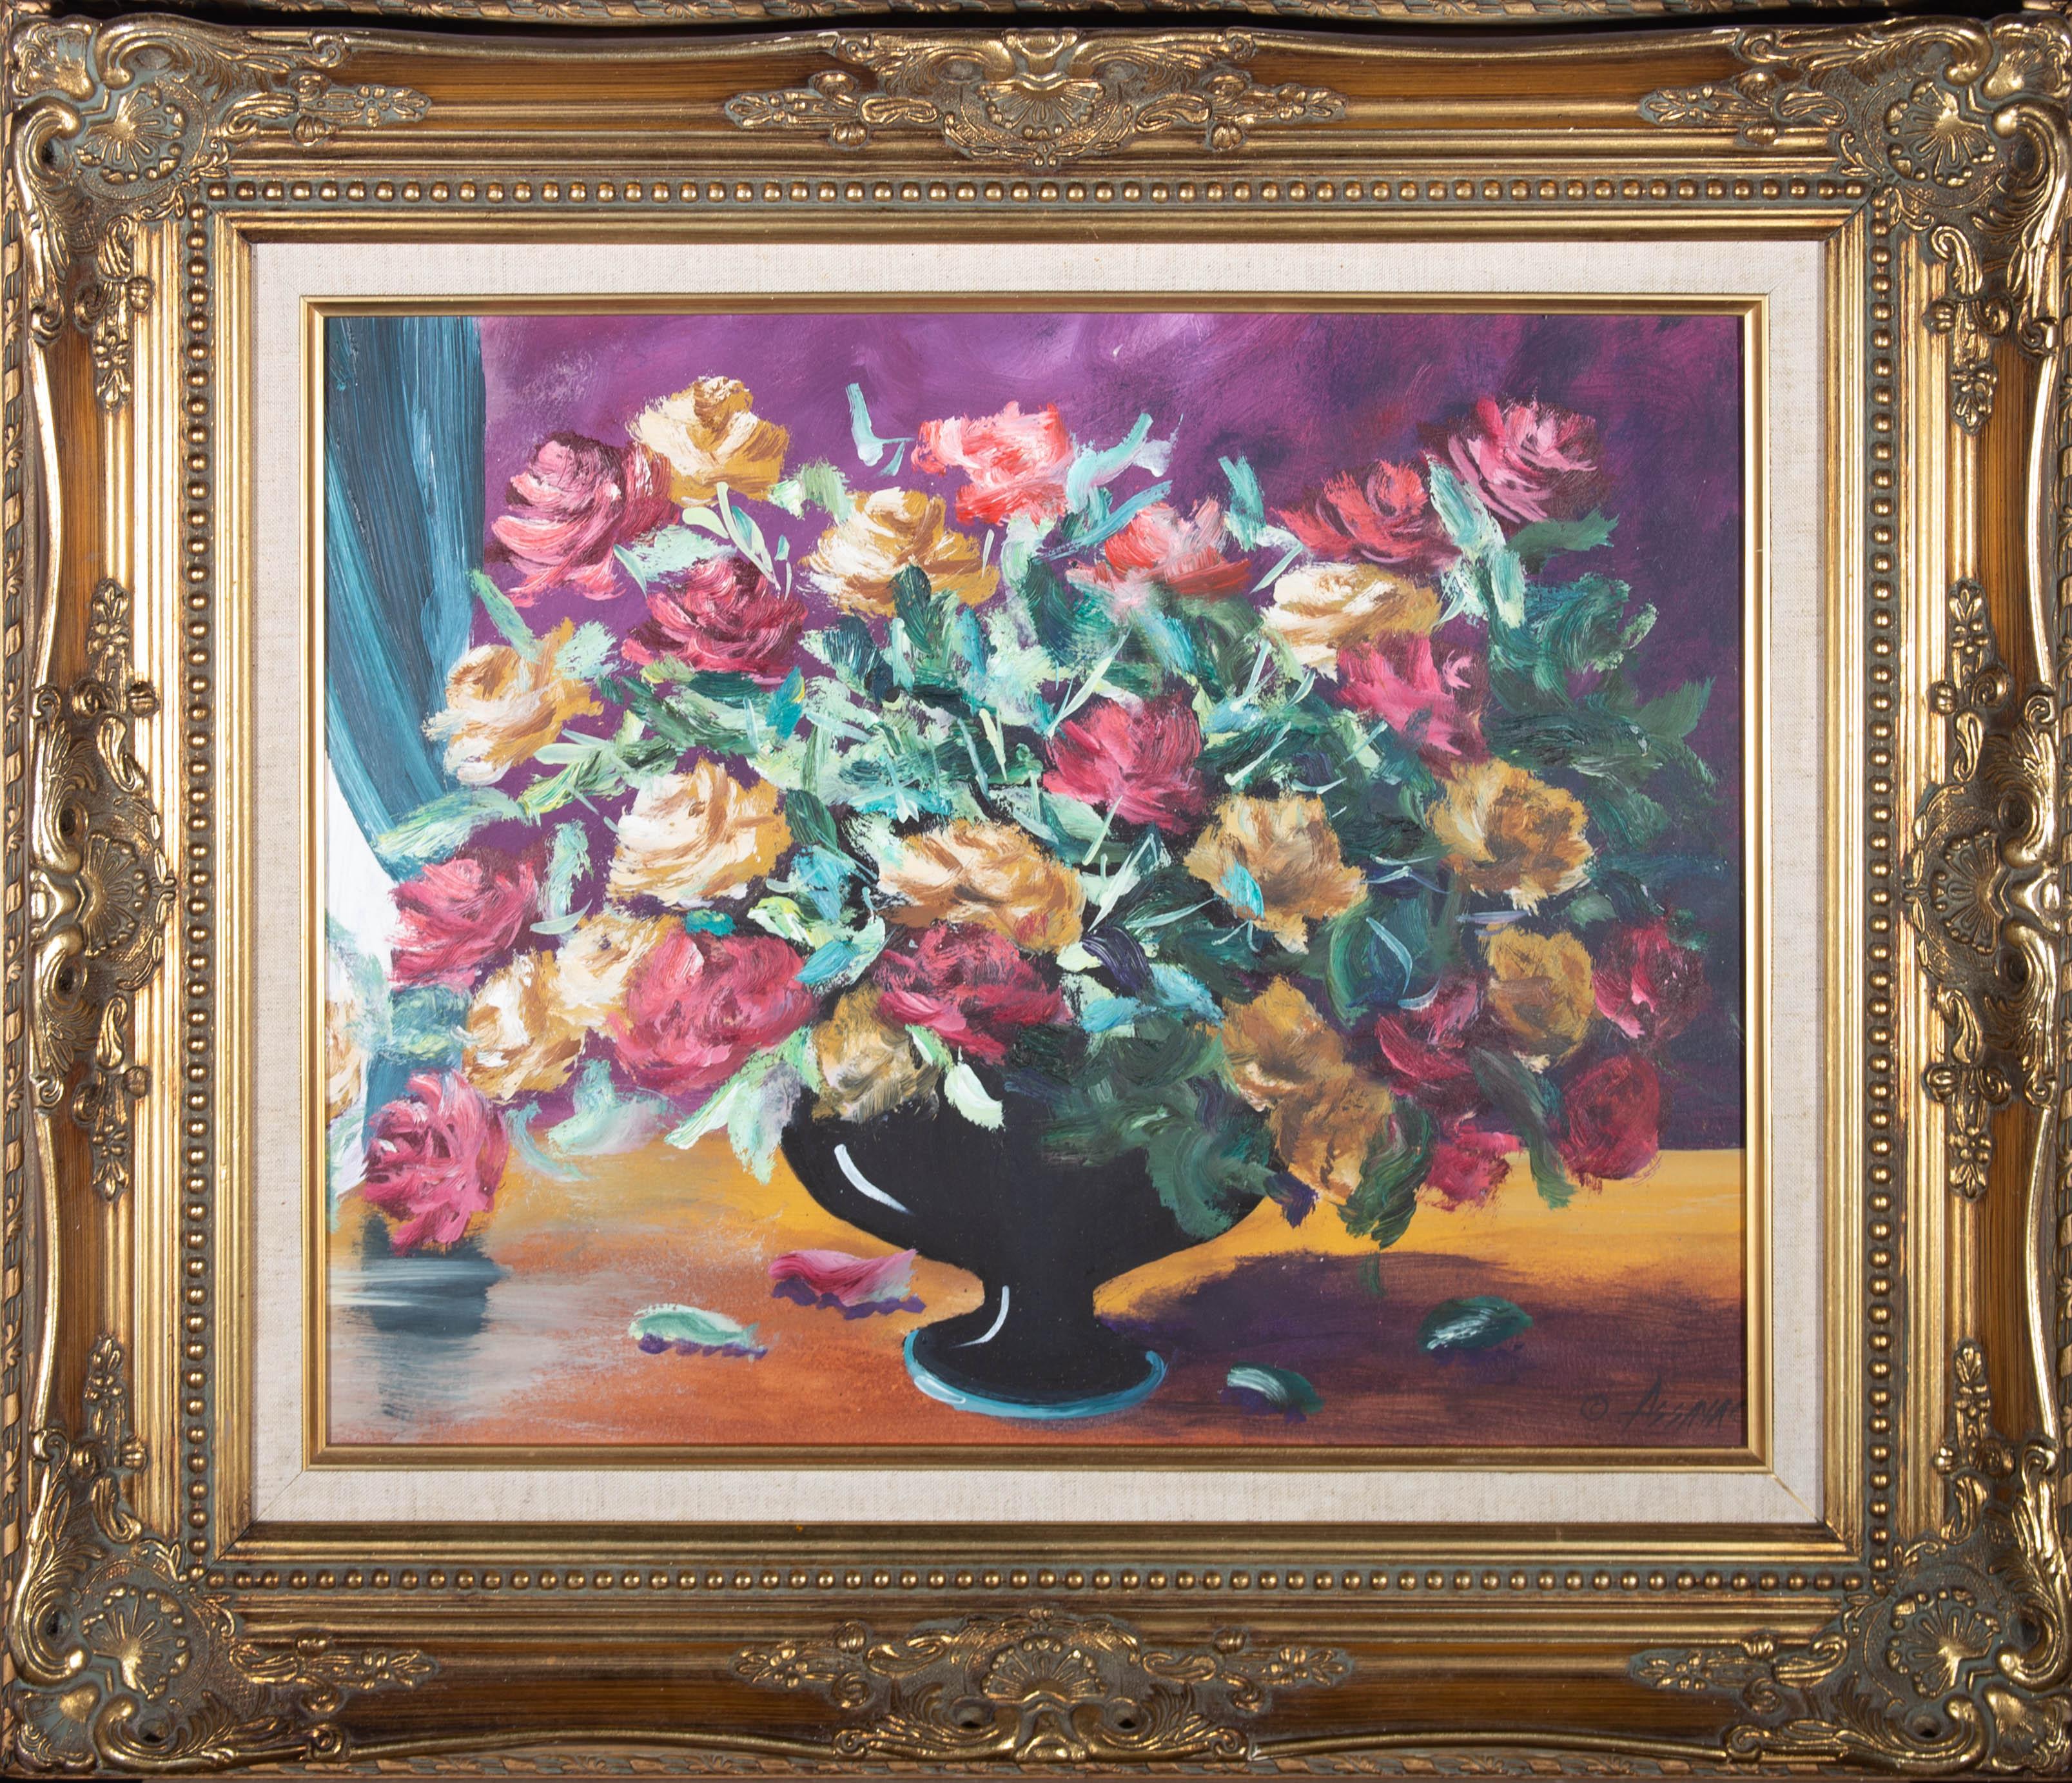 This delightful floral study depicts colourful summer blooms in a shallow vase. Painted in expressive, gestural brushstrokes, the artist has captured movement and vibrancy within this still life piece. Signed to the lower right with a signature and